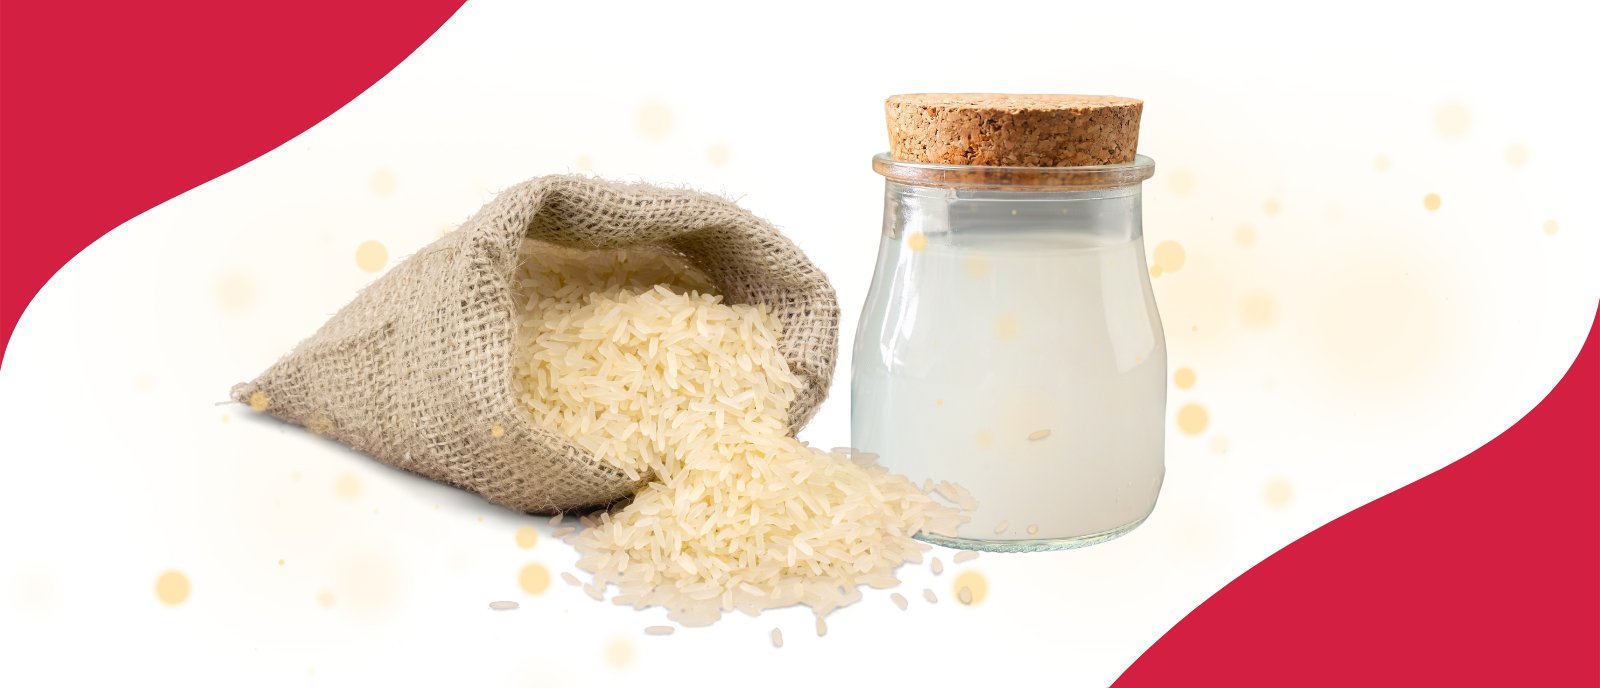 Using Rice Water For Hair Growth, Does It Actually Work? - GlammedNaturallyOil